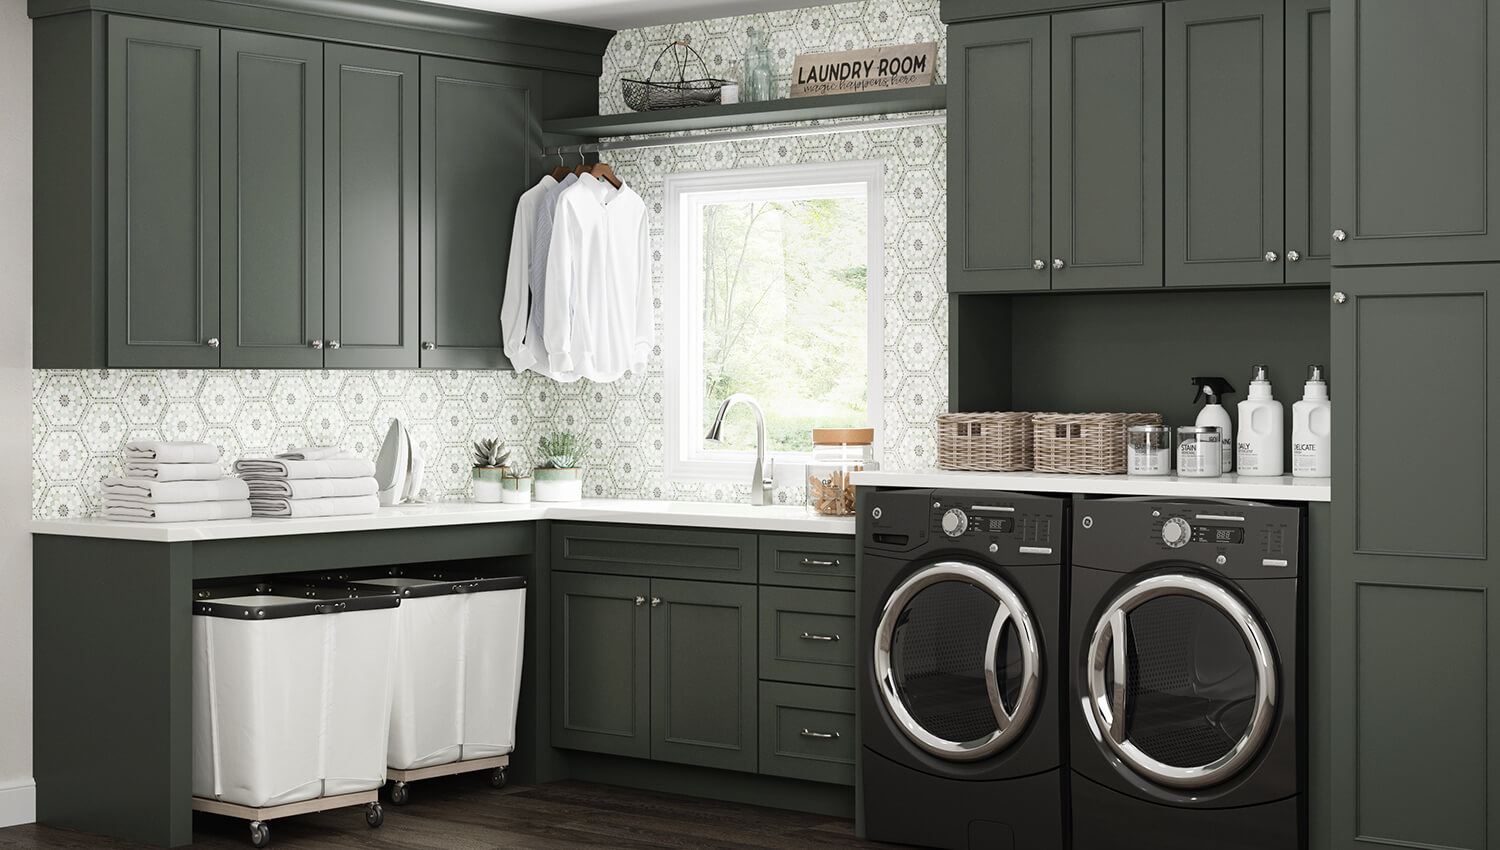 Dark olive green painted cabinets with a custom paint match finish using Dura Supreme's Personal Paint Match program to perfectly match the finish to Sherwin-Williams Rock Bottom paint color. A detailed hand-painted backsplash tile complements the color of the cabinetry throughout the room.